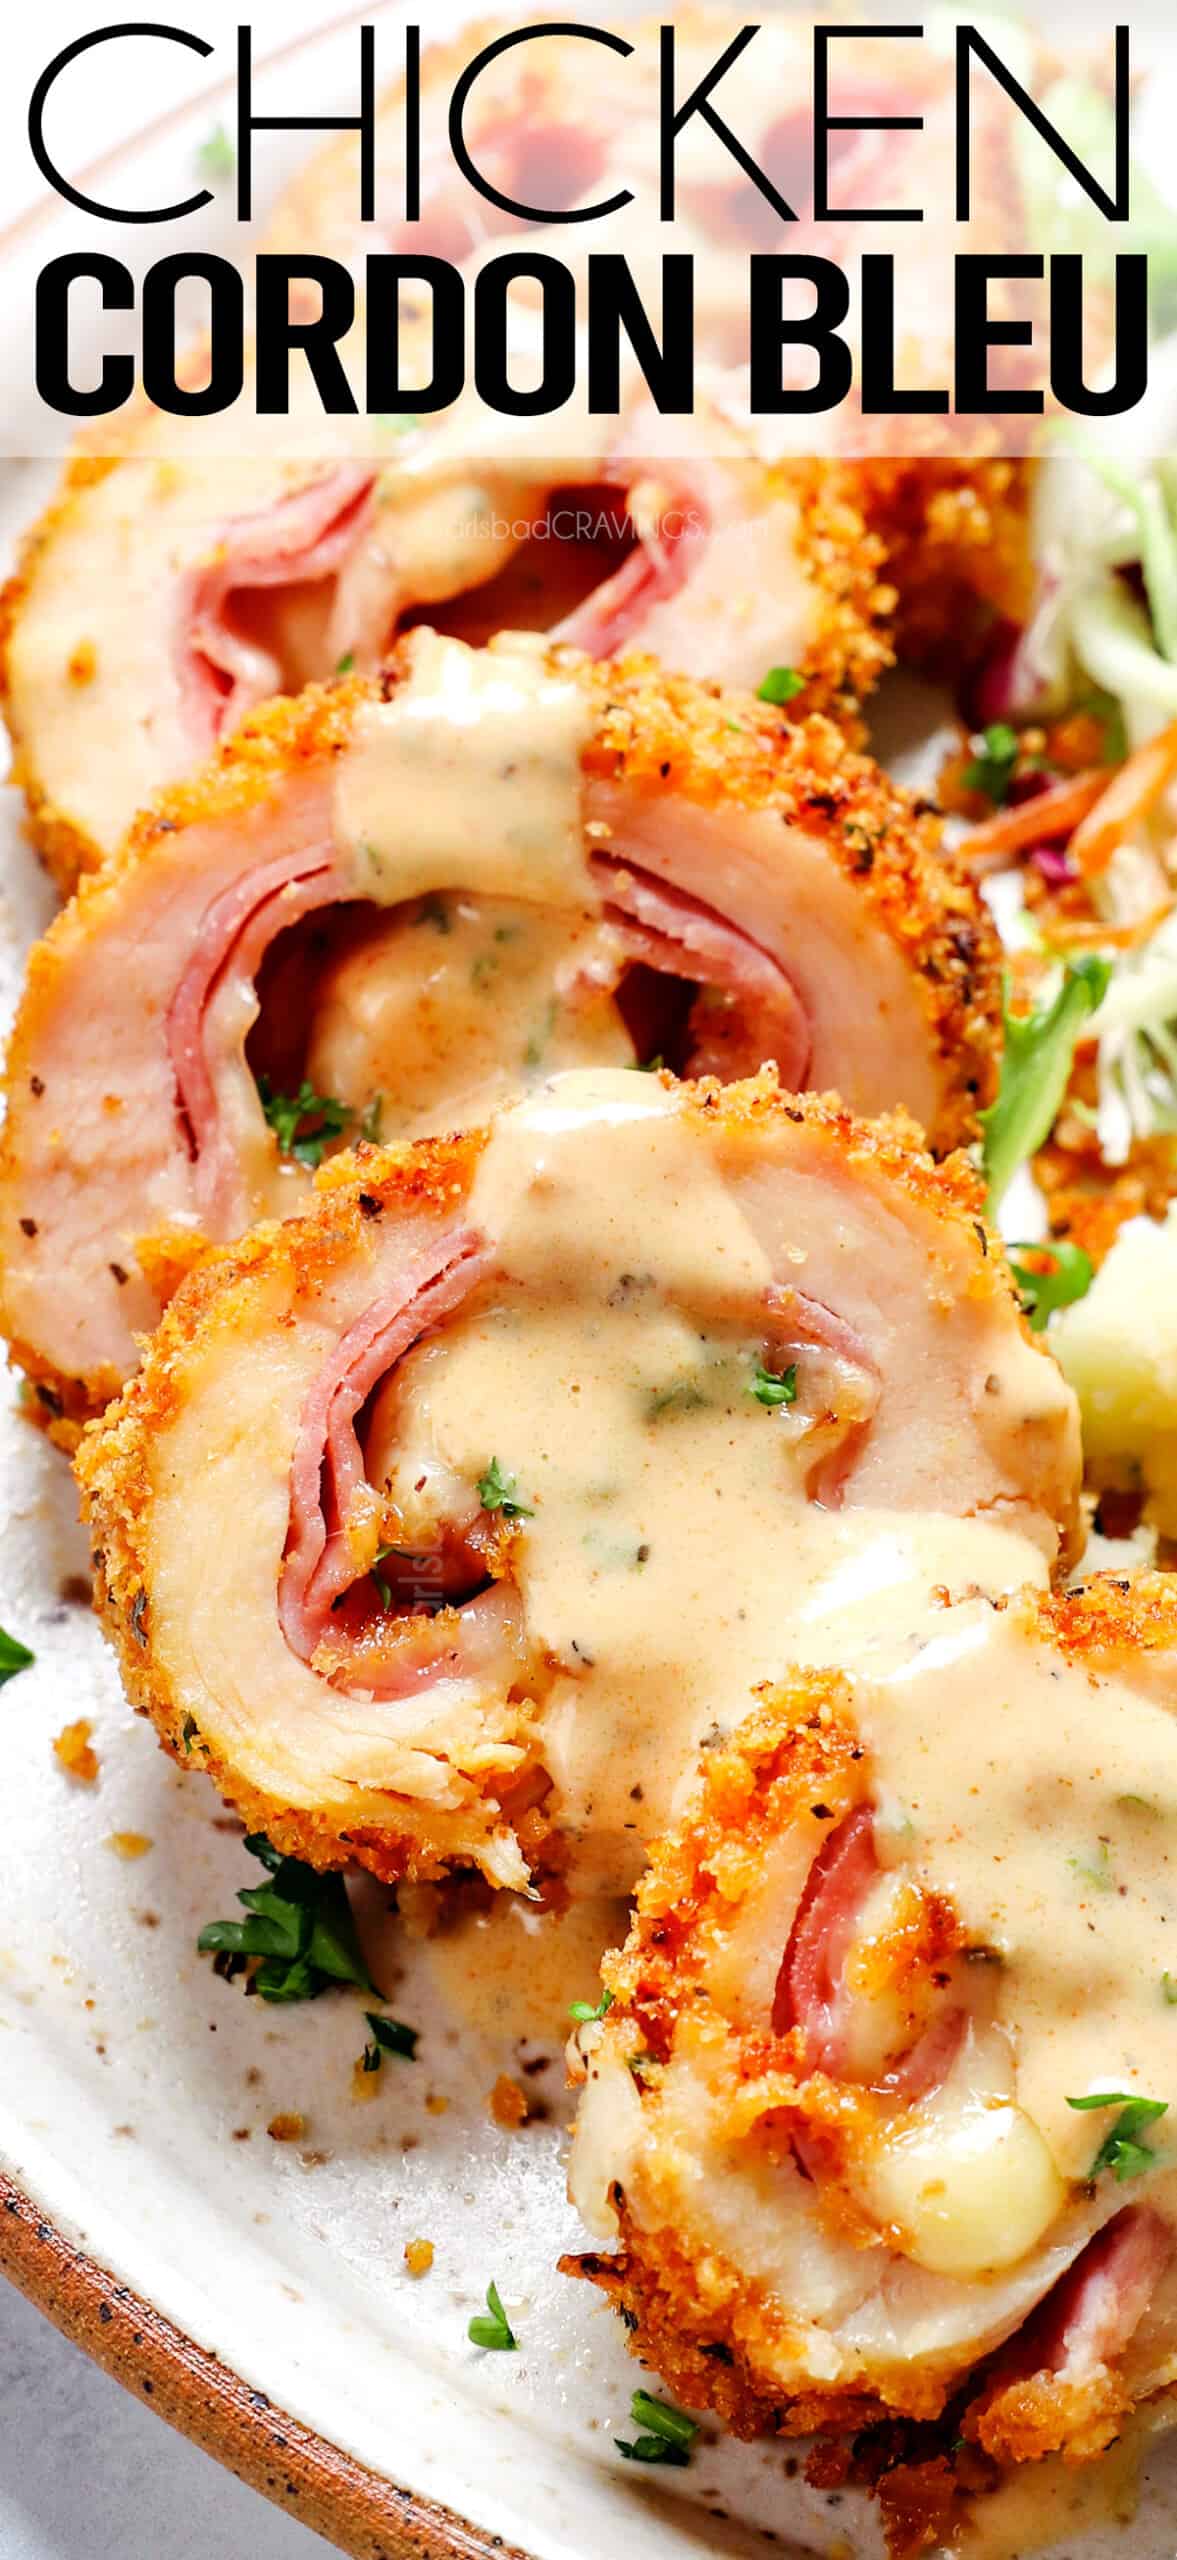 showing how to serve chicken cordon bleu recipe by slicing and serving with Dijon cream sauce